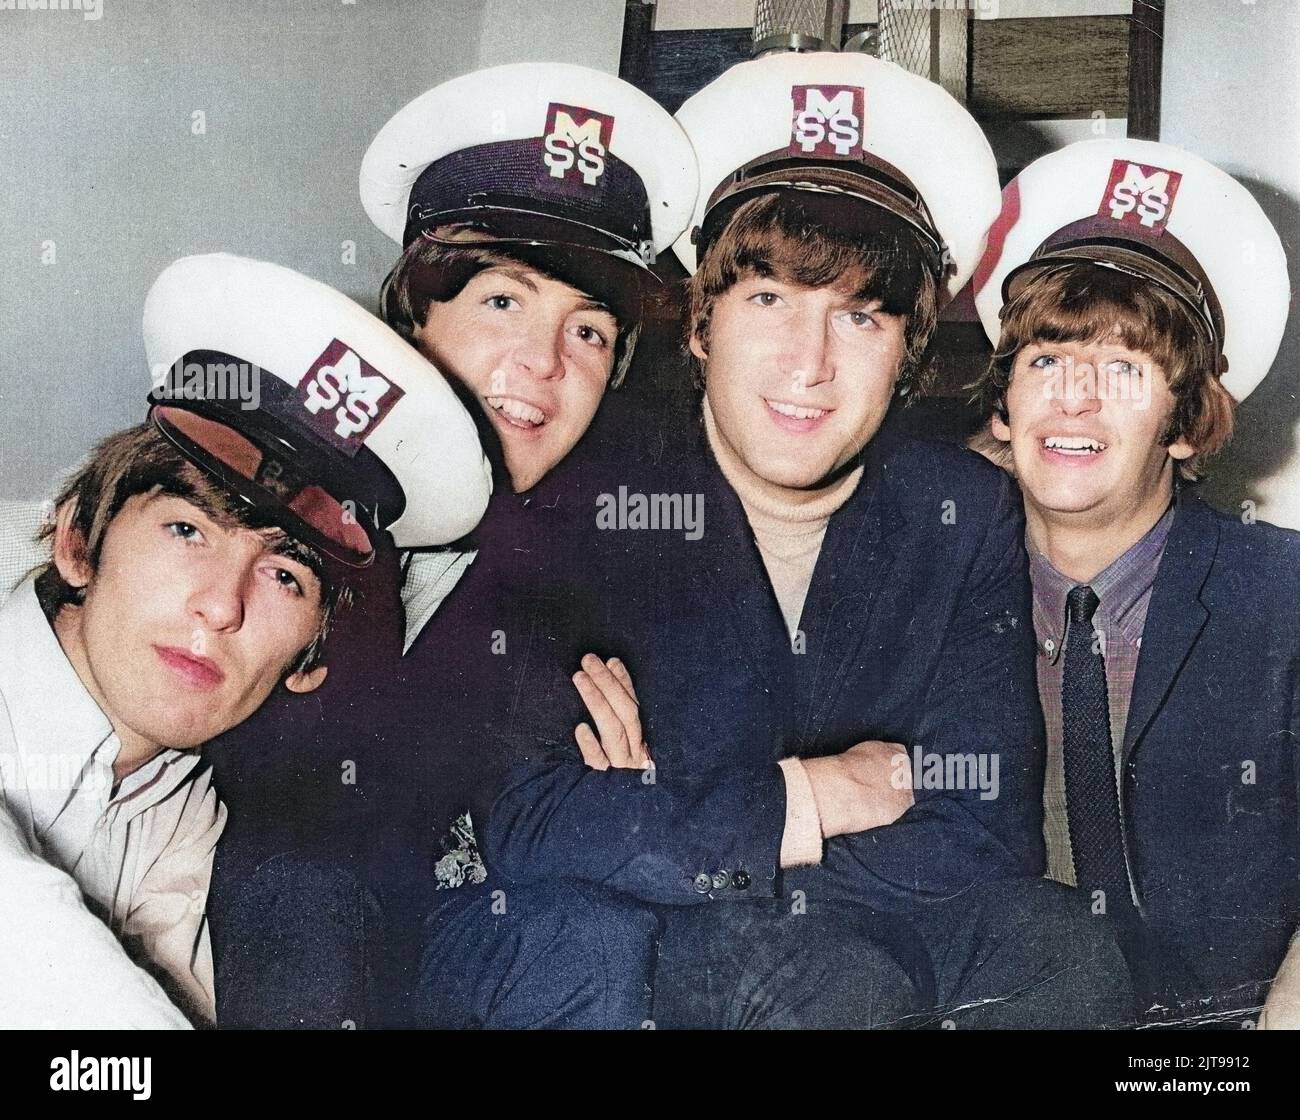 The Beatles wearing MSS caps on their 1964 tour of Australia. Devon Minchin's company MSS provided security for the band and he took personal charge. Colorized photo. Stock Photo